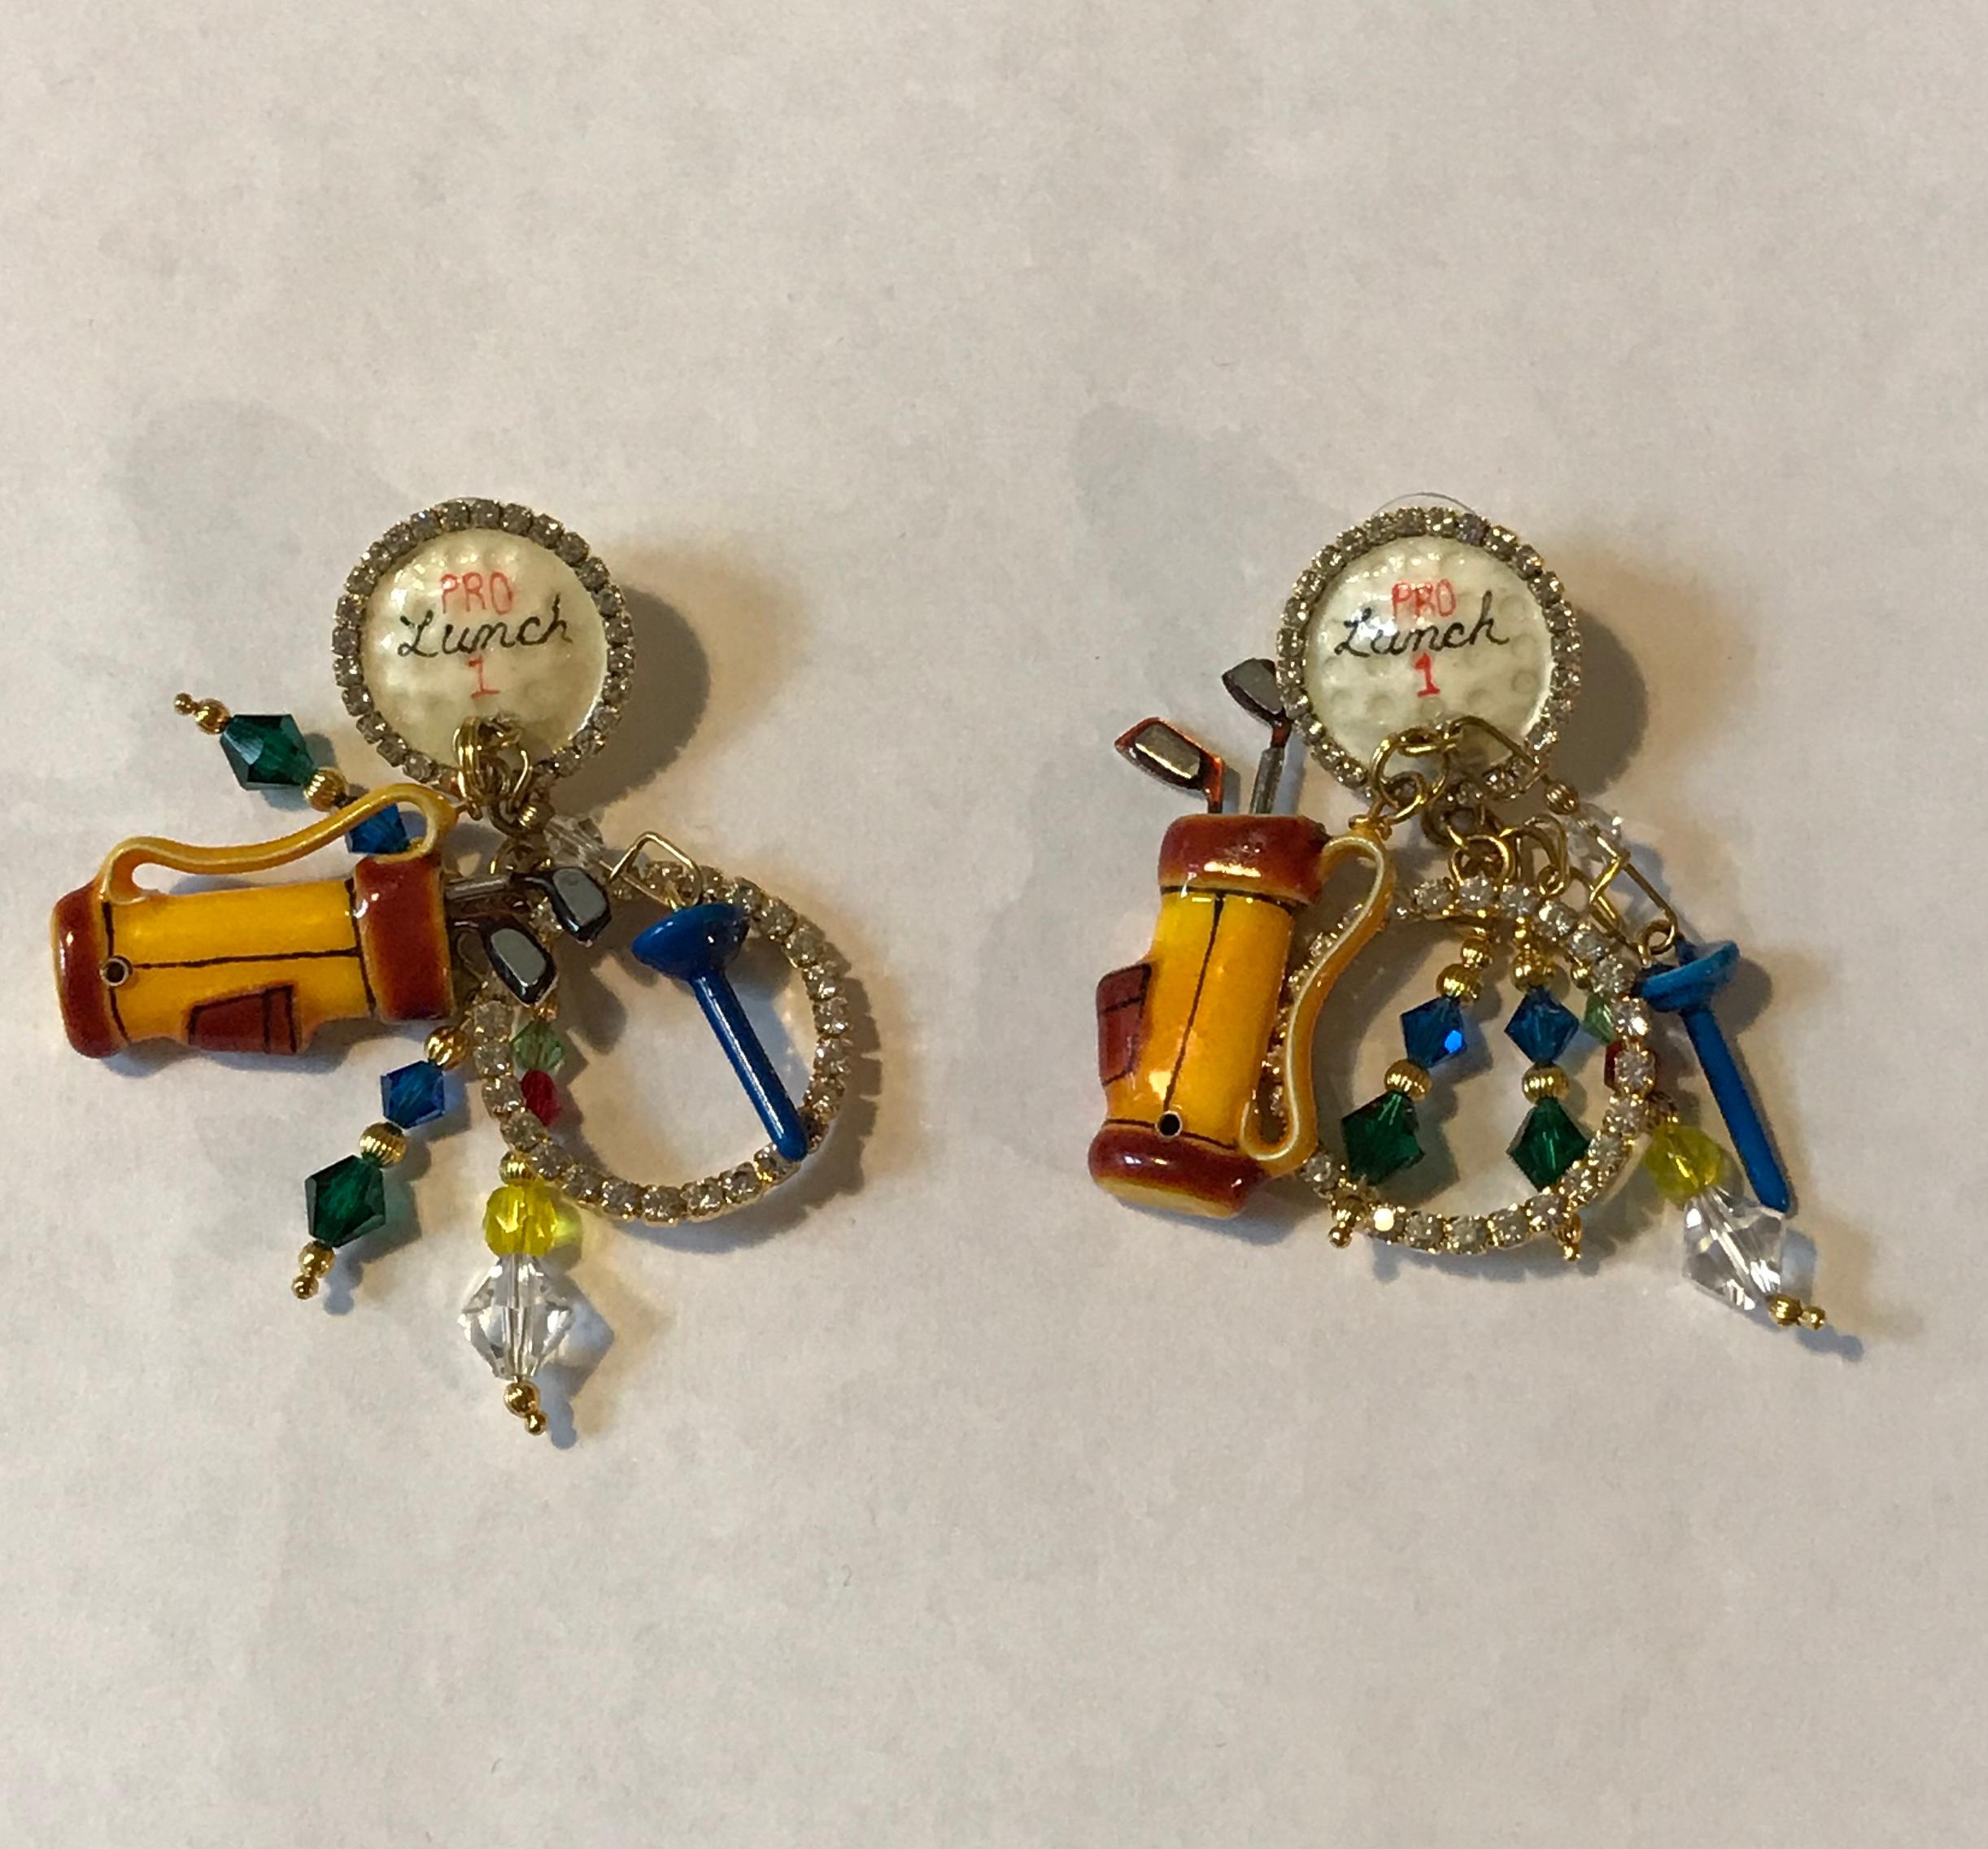 Lunch at the Ritz vintage 1990s gold tone golf theme earrings featuring enamel and rhinestone detail and beads. These over the top golf themed costume jewelry earrings feature a golf ball reading 'Pro Lunch 1' encircled in rhinestones, with dangles